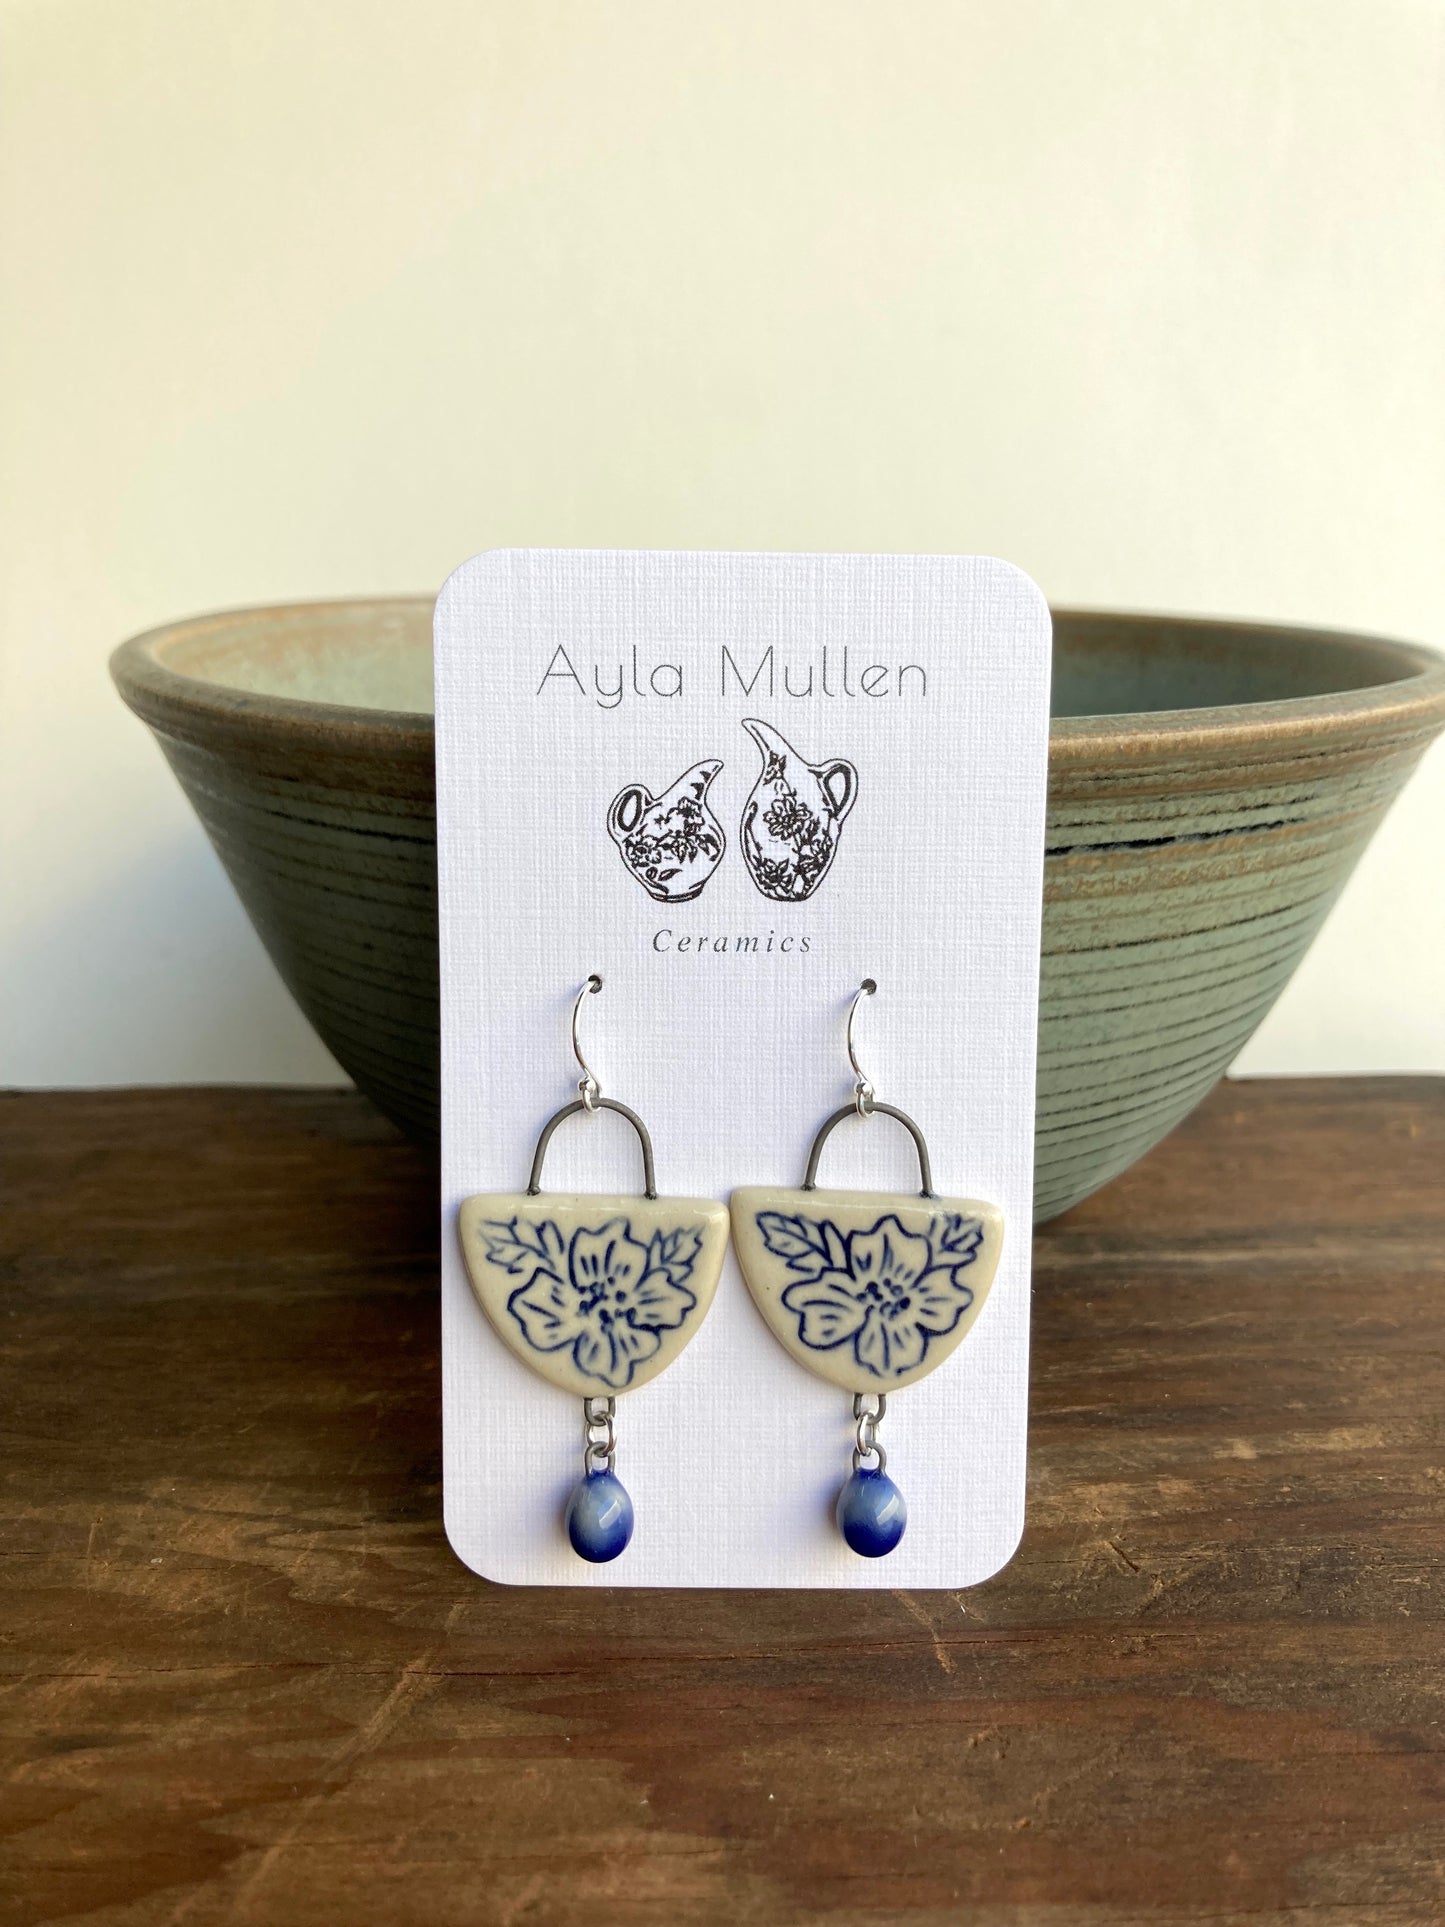 Wild Rose Arch Earrings with Cobalt Blue Dangles, Sterling Silver